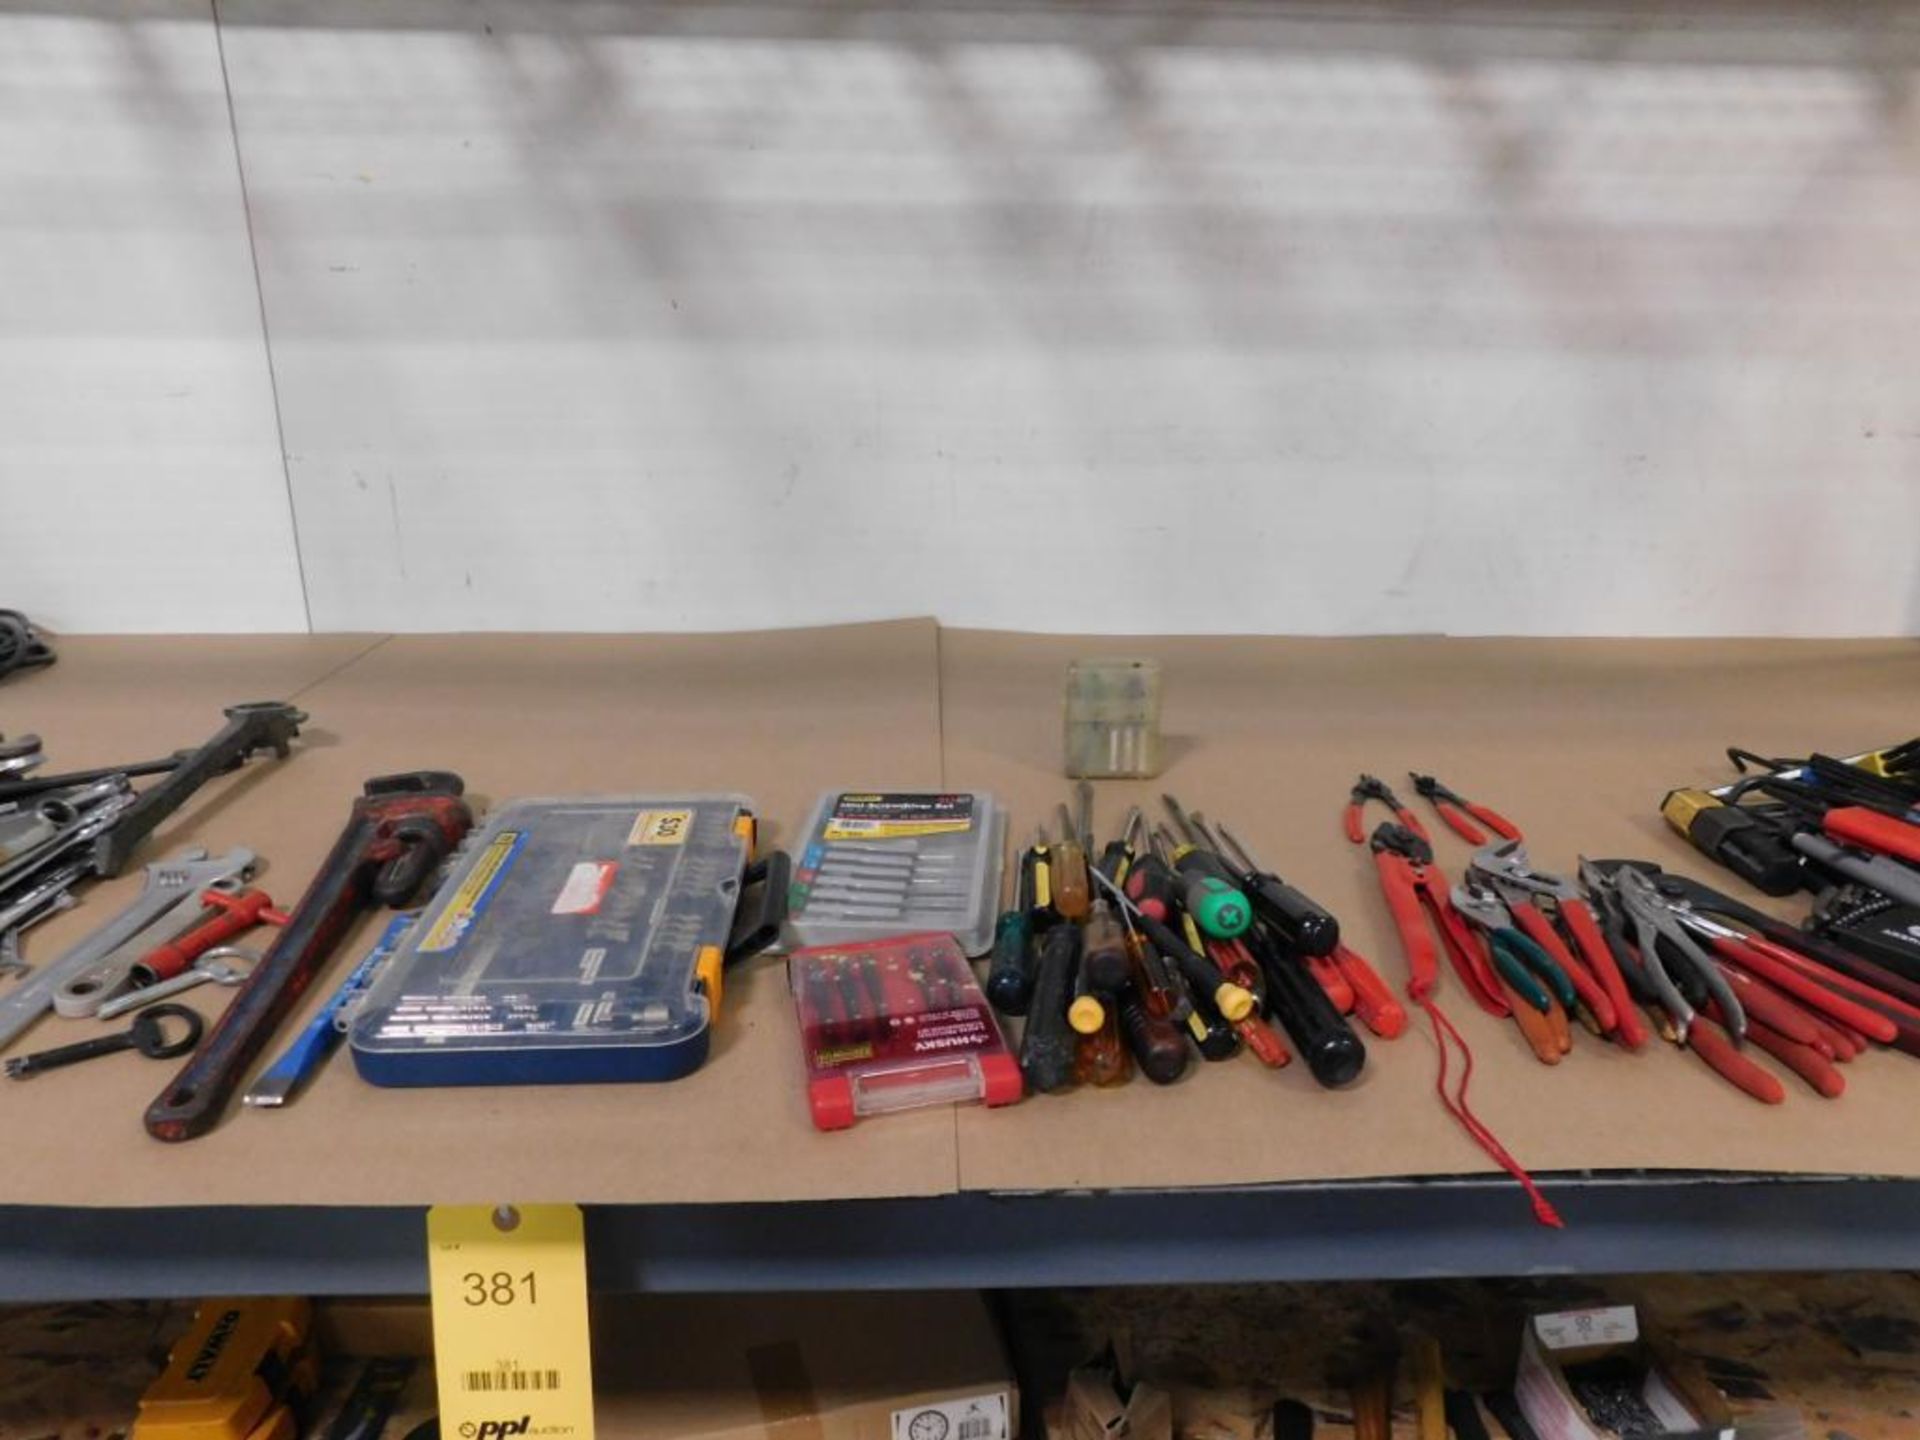 LOT: Contents of Racking including Large Assortment of Tools, Wrenches, Screw Drivers, Allen Wrenche - Image 3 of 5